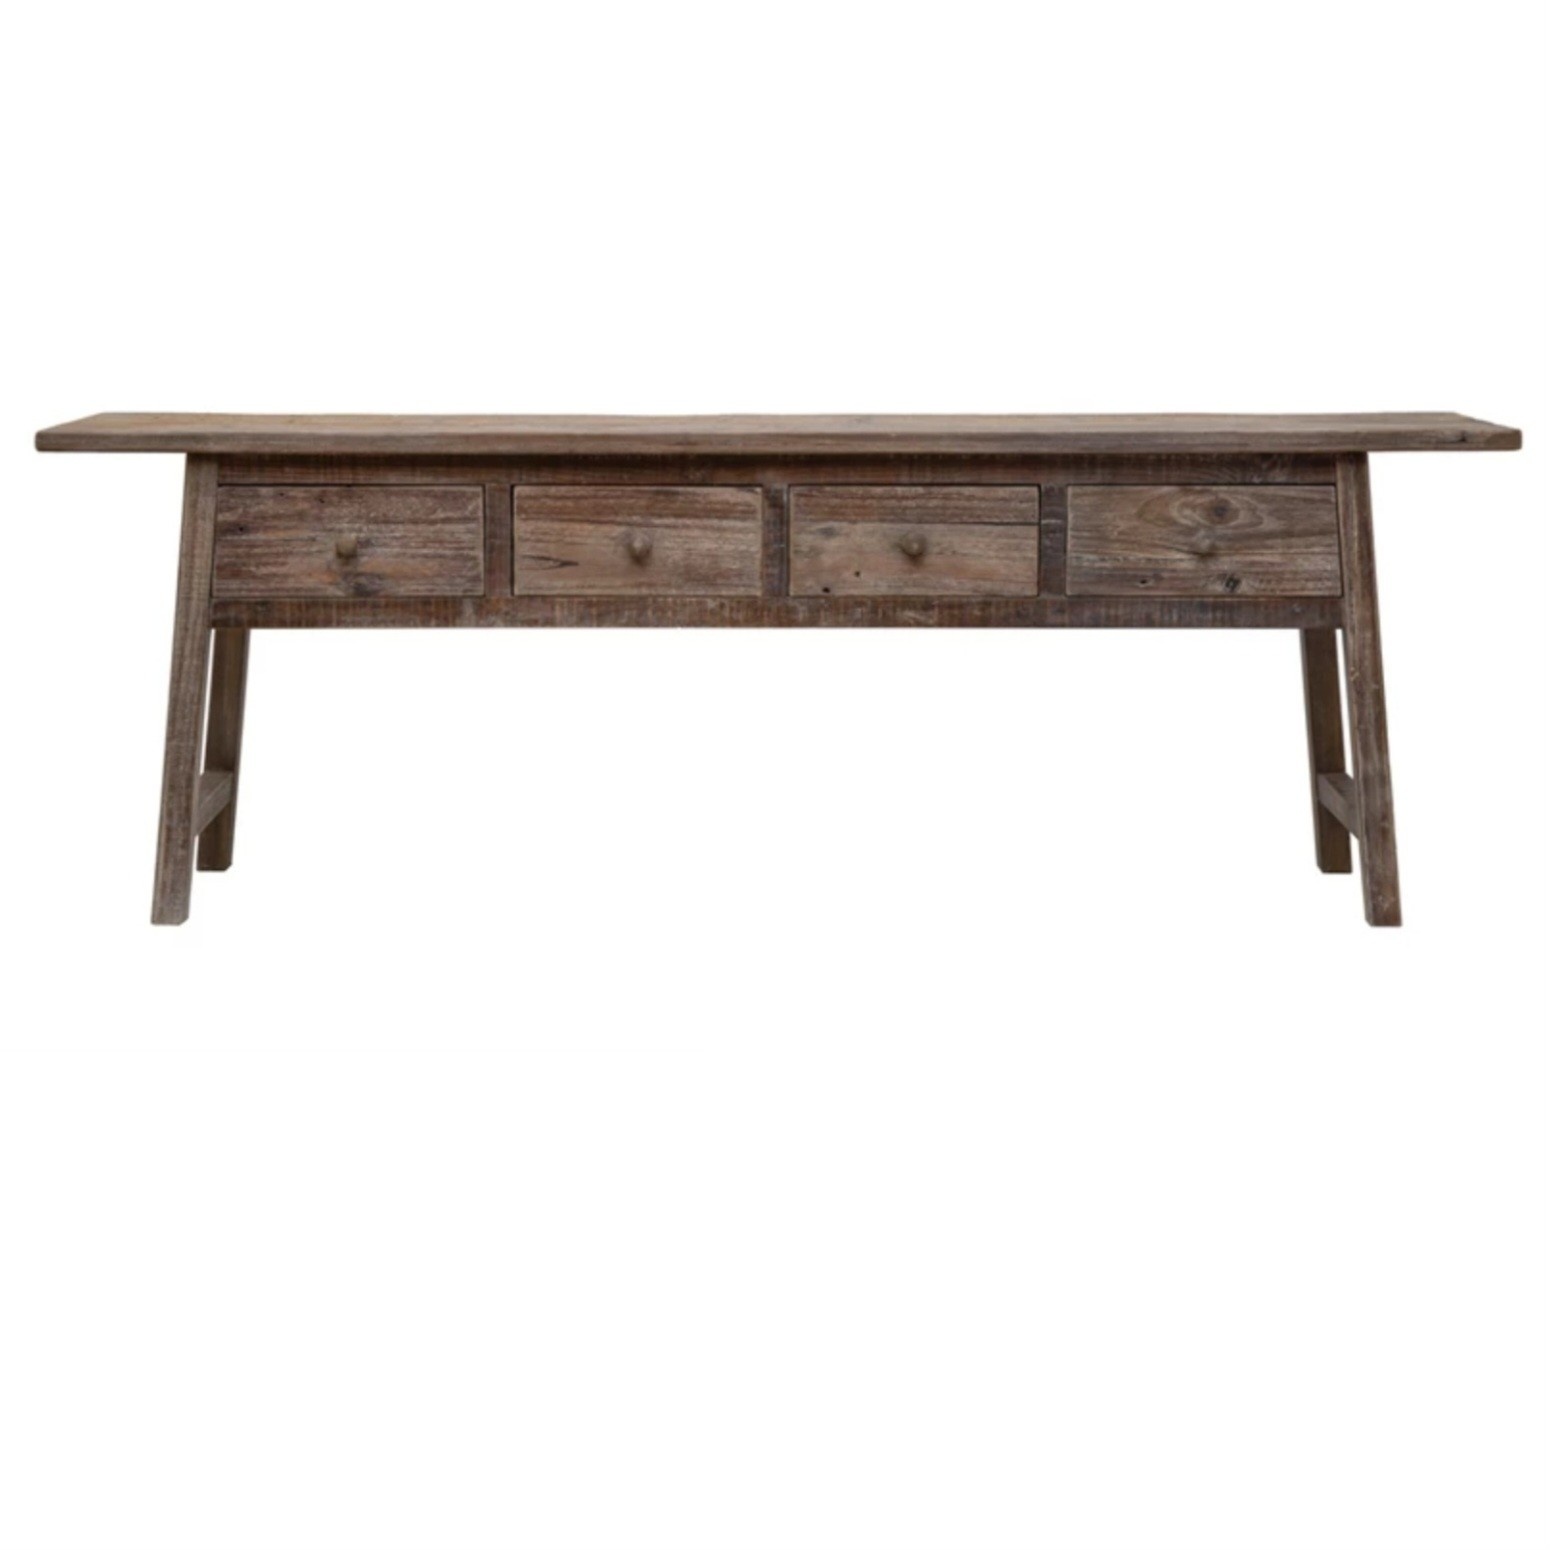 Reclaimed Pine Wood Console Table 70 x 15 x 24 Furniture Available for Local Delivery or Pick Up